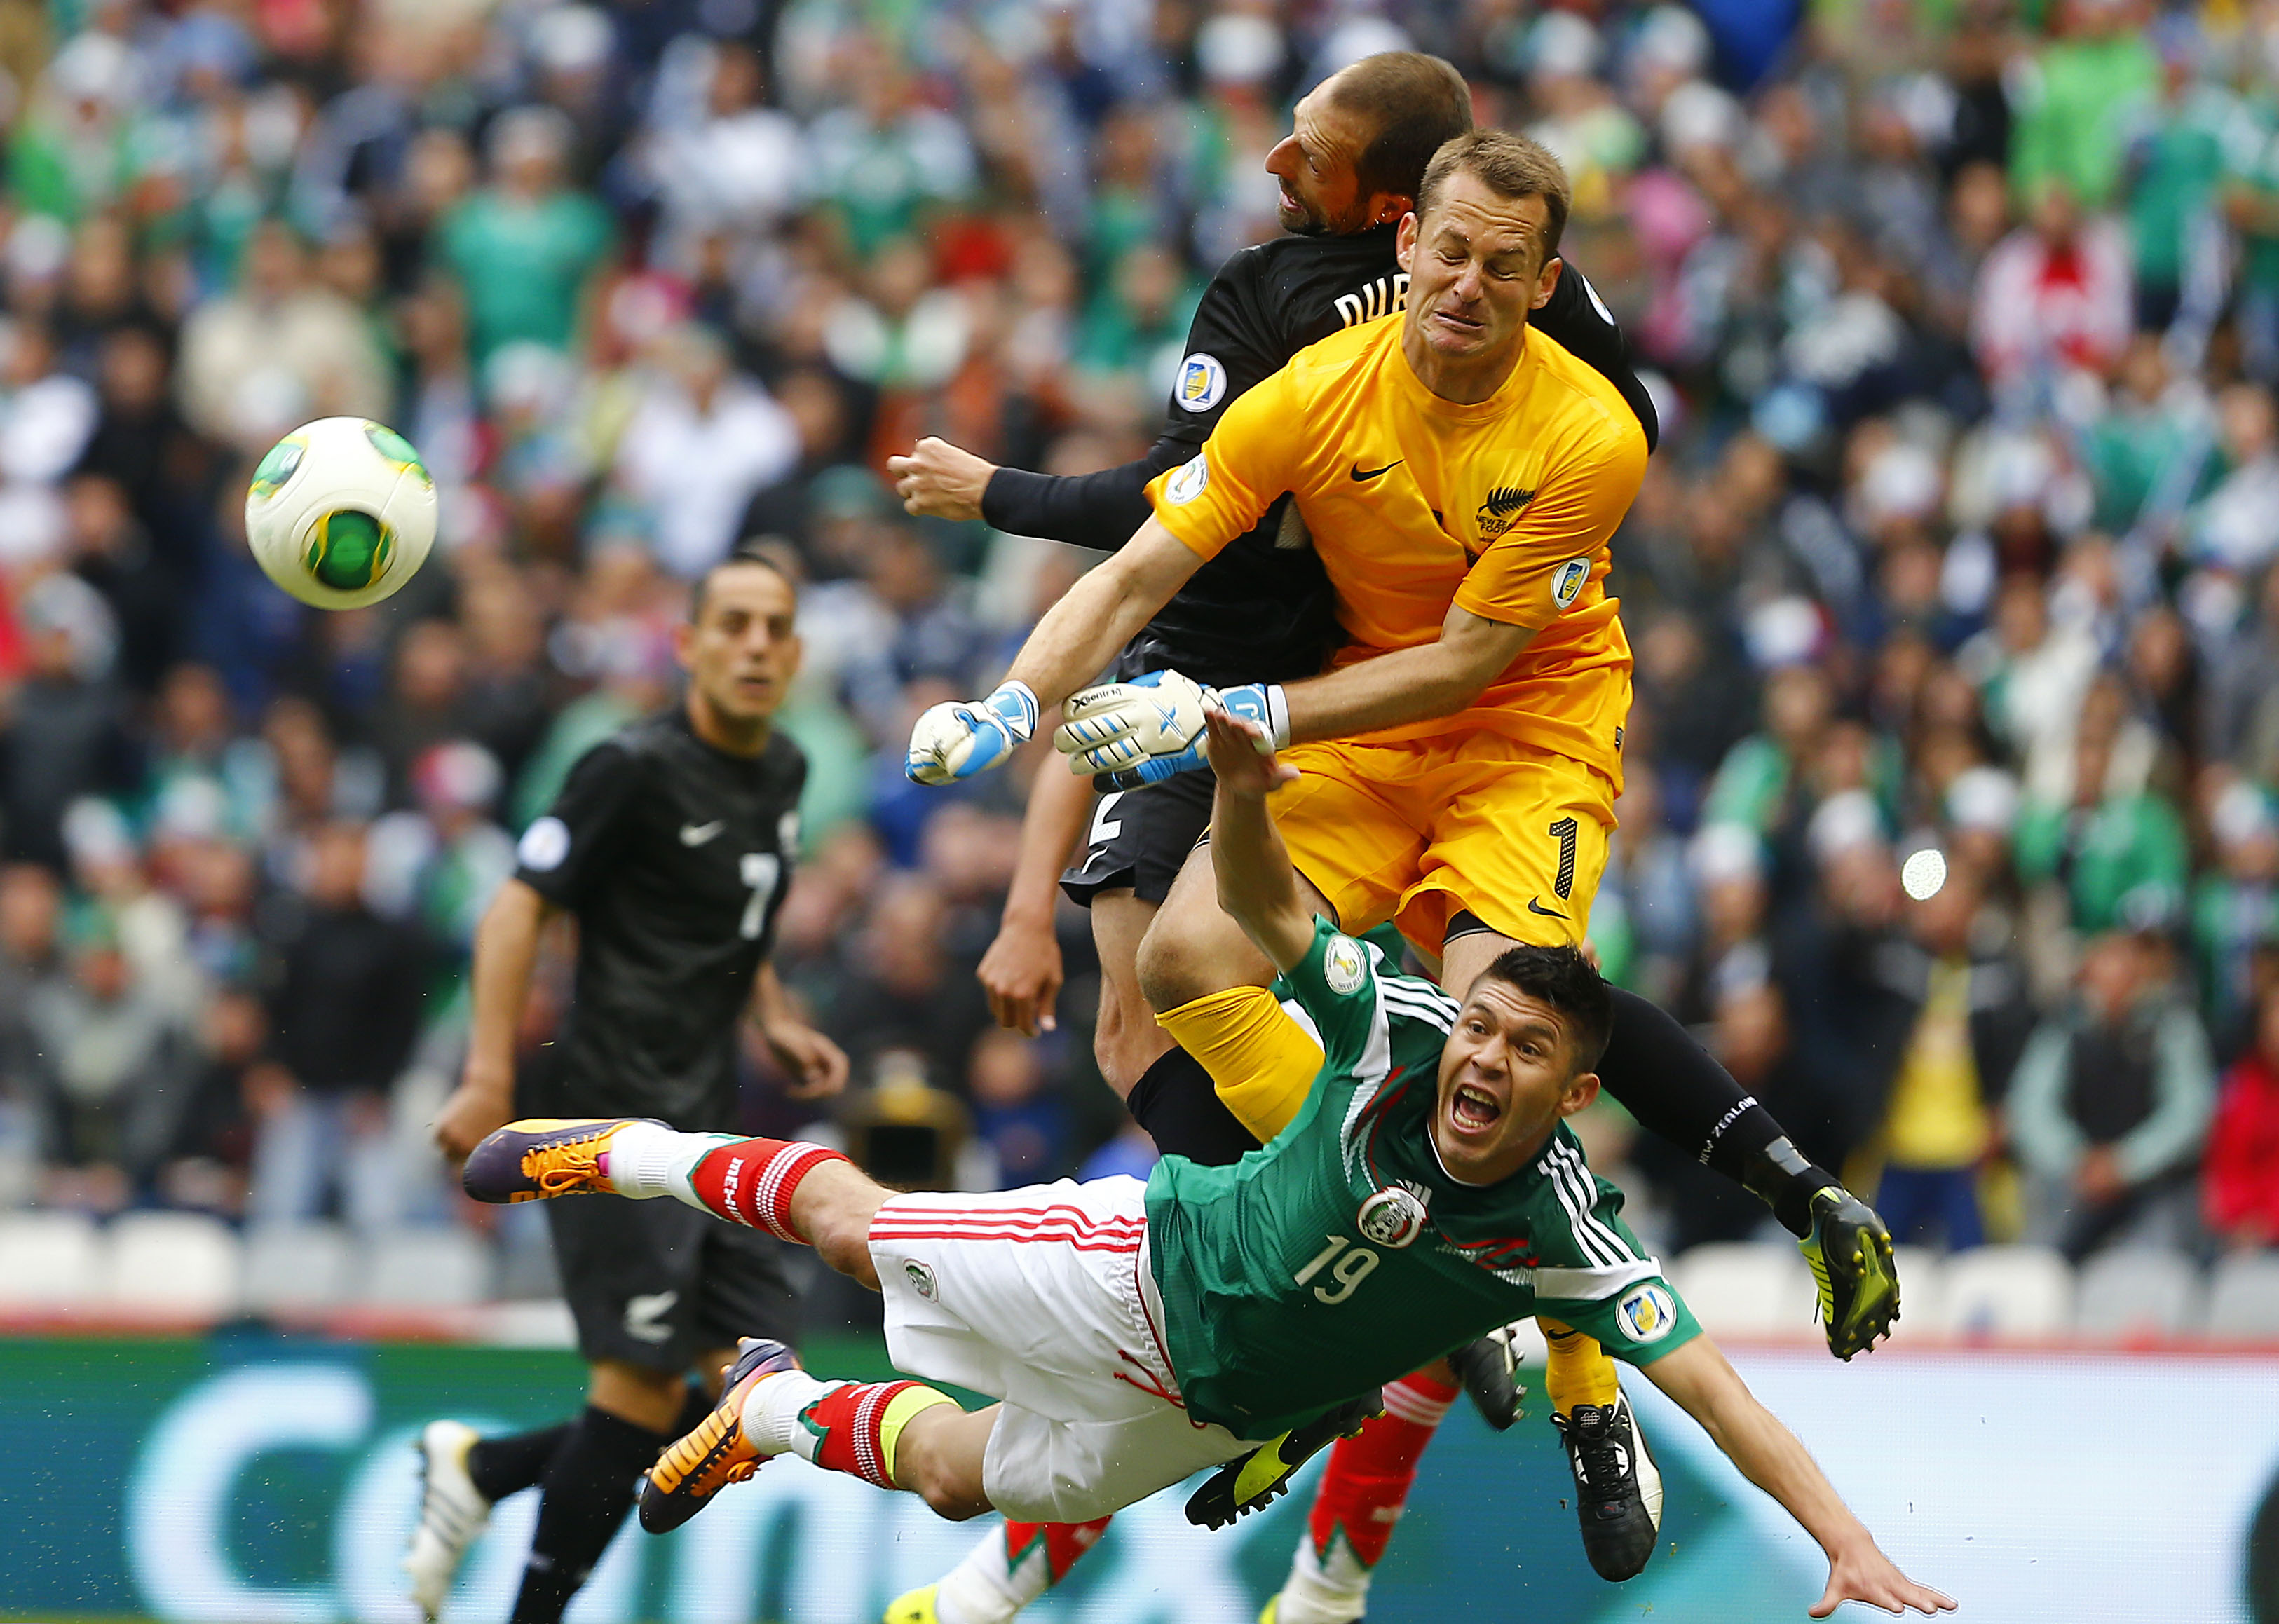 Mexico qualifies for World Cup with 4-2 win over NZ | Inquirer Sports